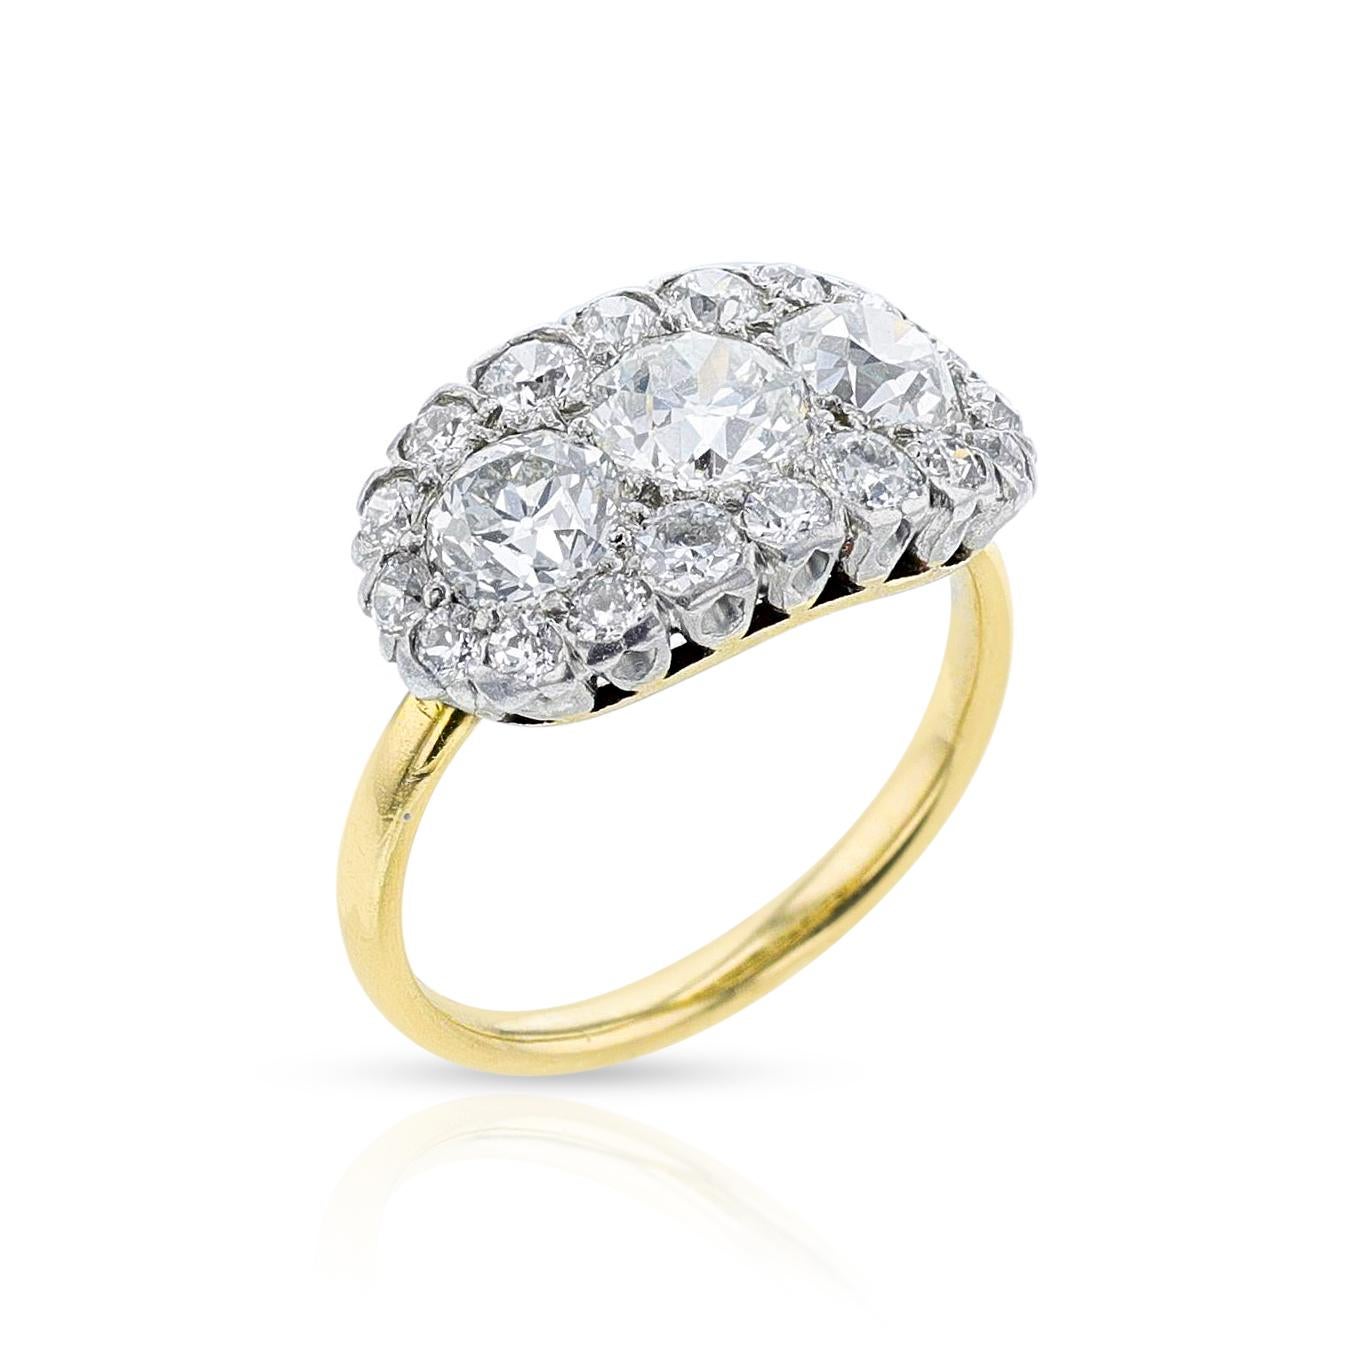 A Tiffany & Co. Antique Diamond Ring made in Platinum & 18k Yellow Gold. The diamonds are European-cut and the total is appx. 2.05 carats. The total weight of the ring is 4.60 grams. The ring size is 5.75 US. The center diamond is appx. 0.63 carats.